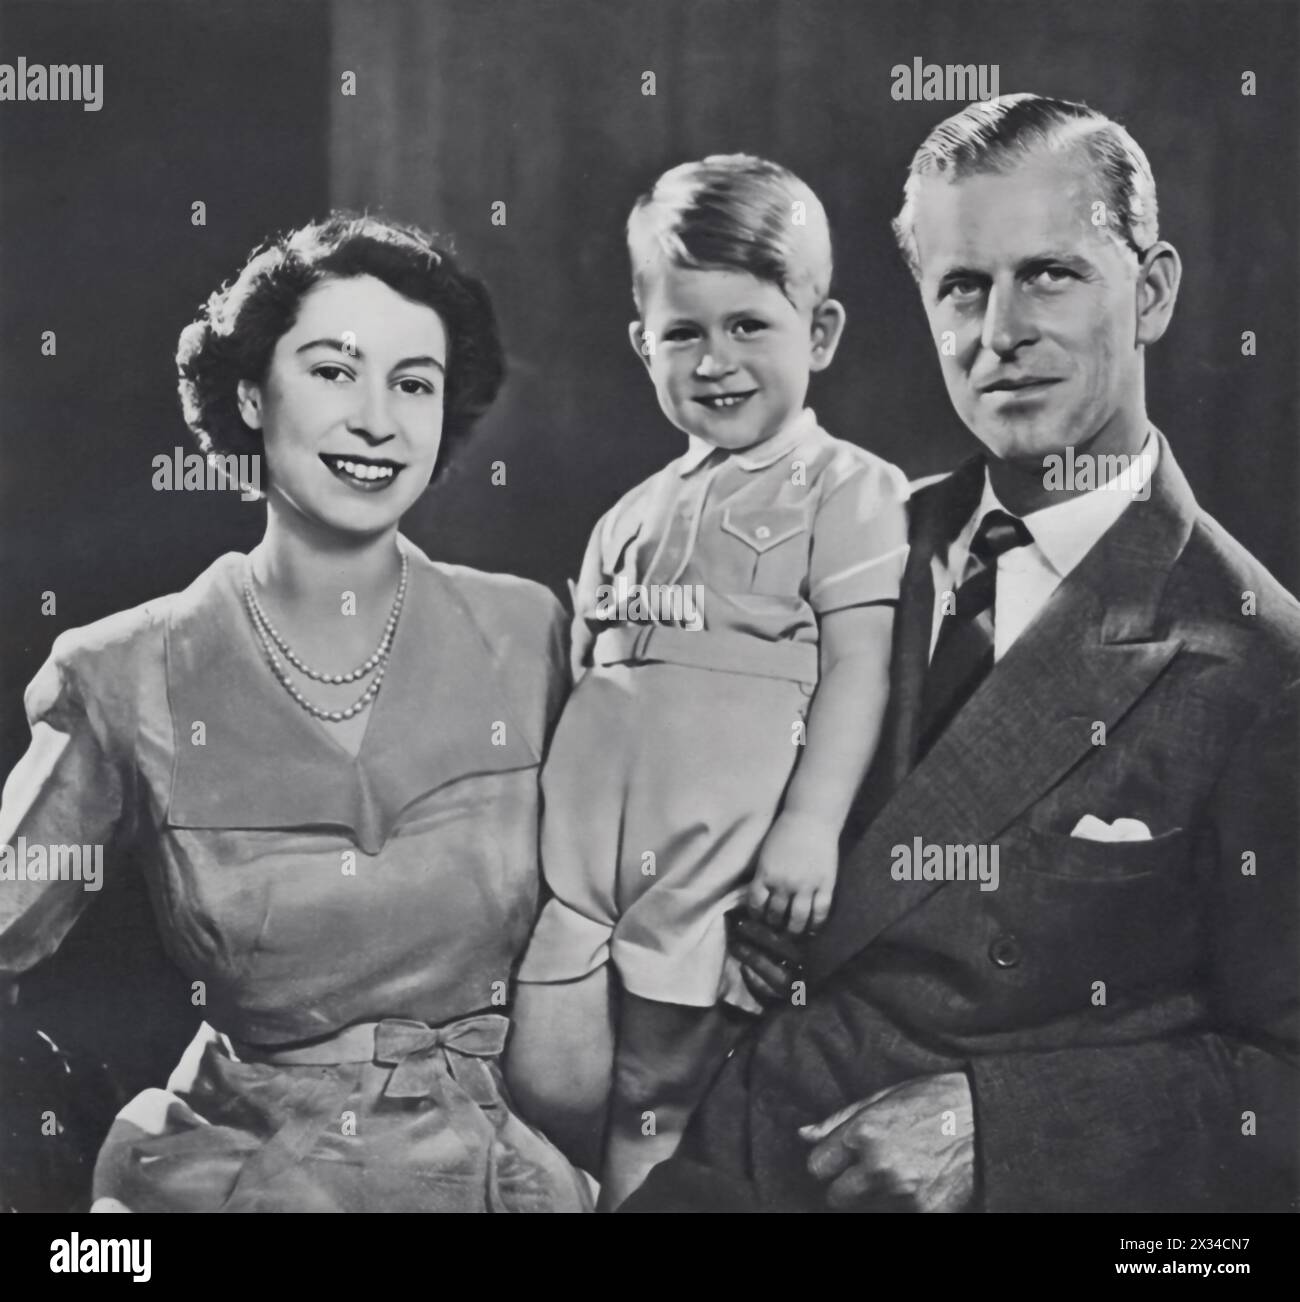 Princess Elizabeth, her husband Philip, the Duke of Edinburgh, and their firstborn son Prince Charles are captured in this photograph from August 1951, just months before Charles’s third birthday. The family moment precedes Elizabeth's accession to the throne as Queen of the Commonwealth in February 1952, marking a significant period in royal history. Stock Photo